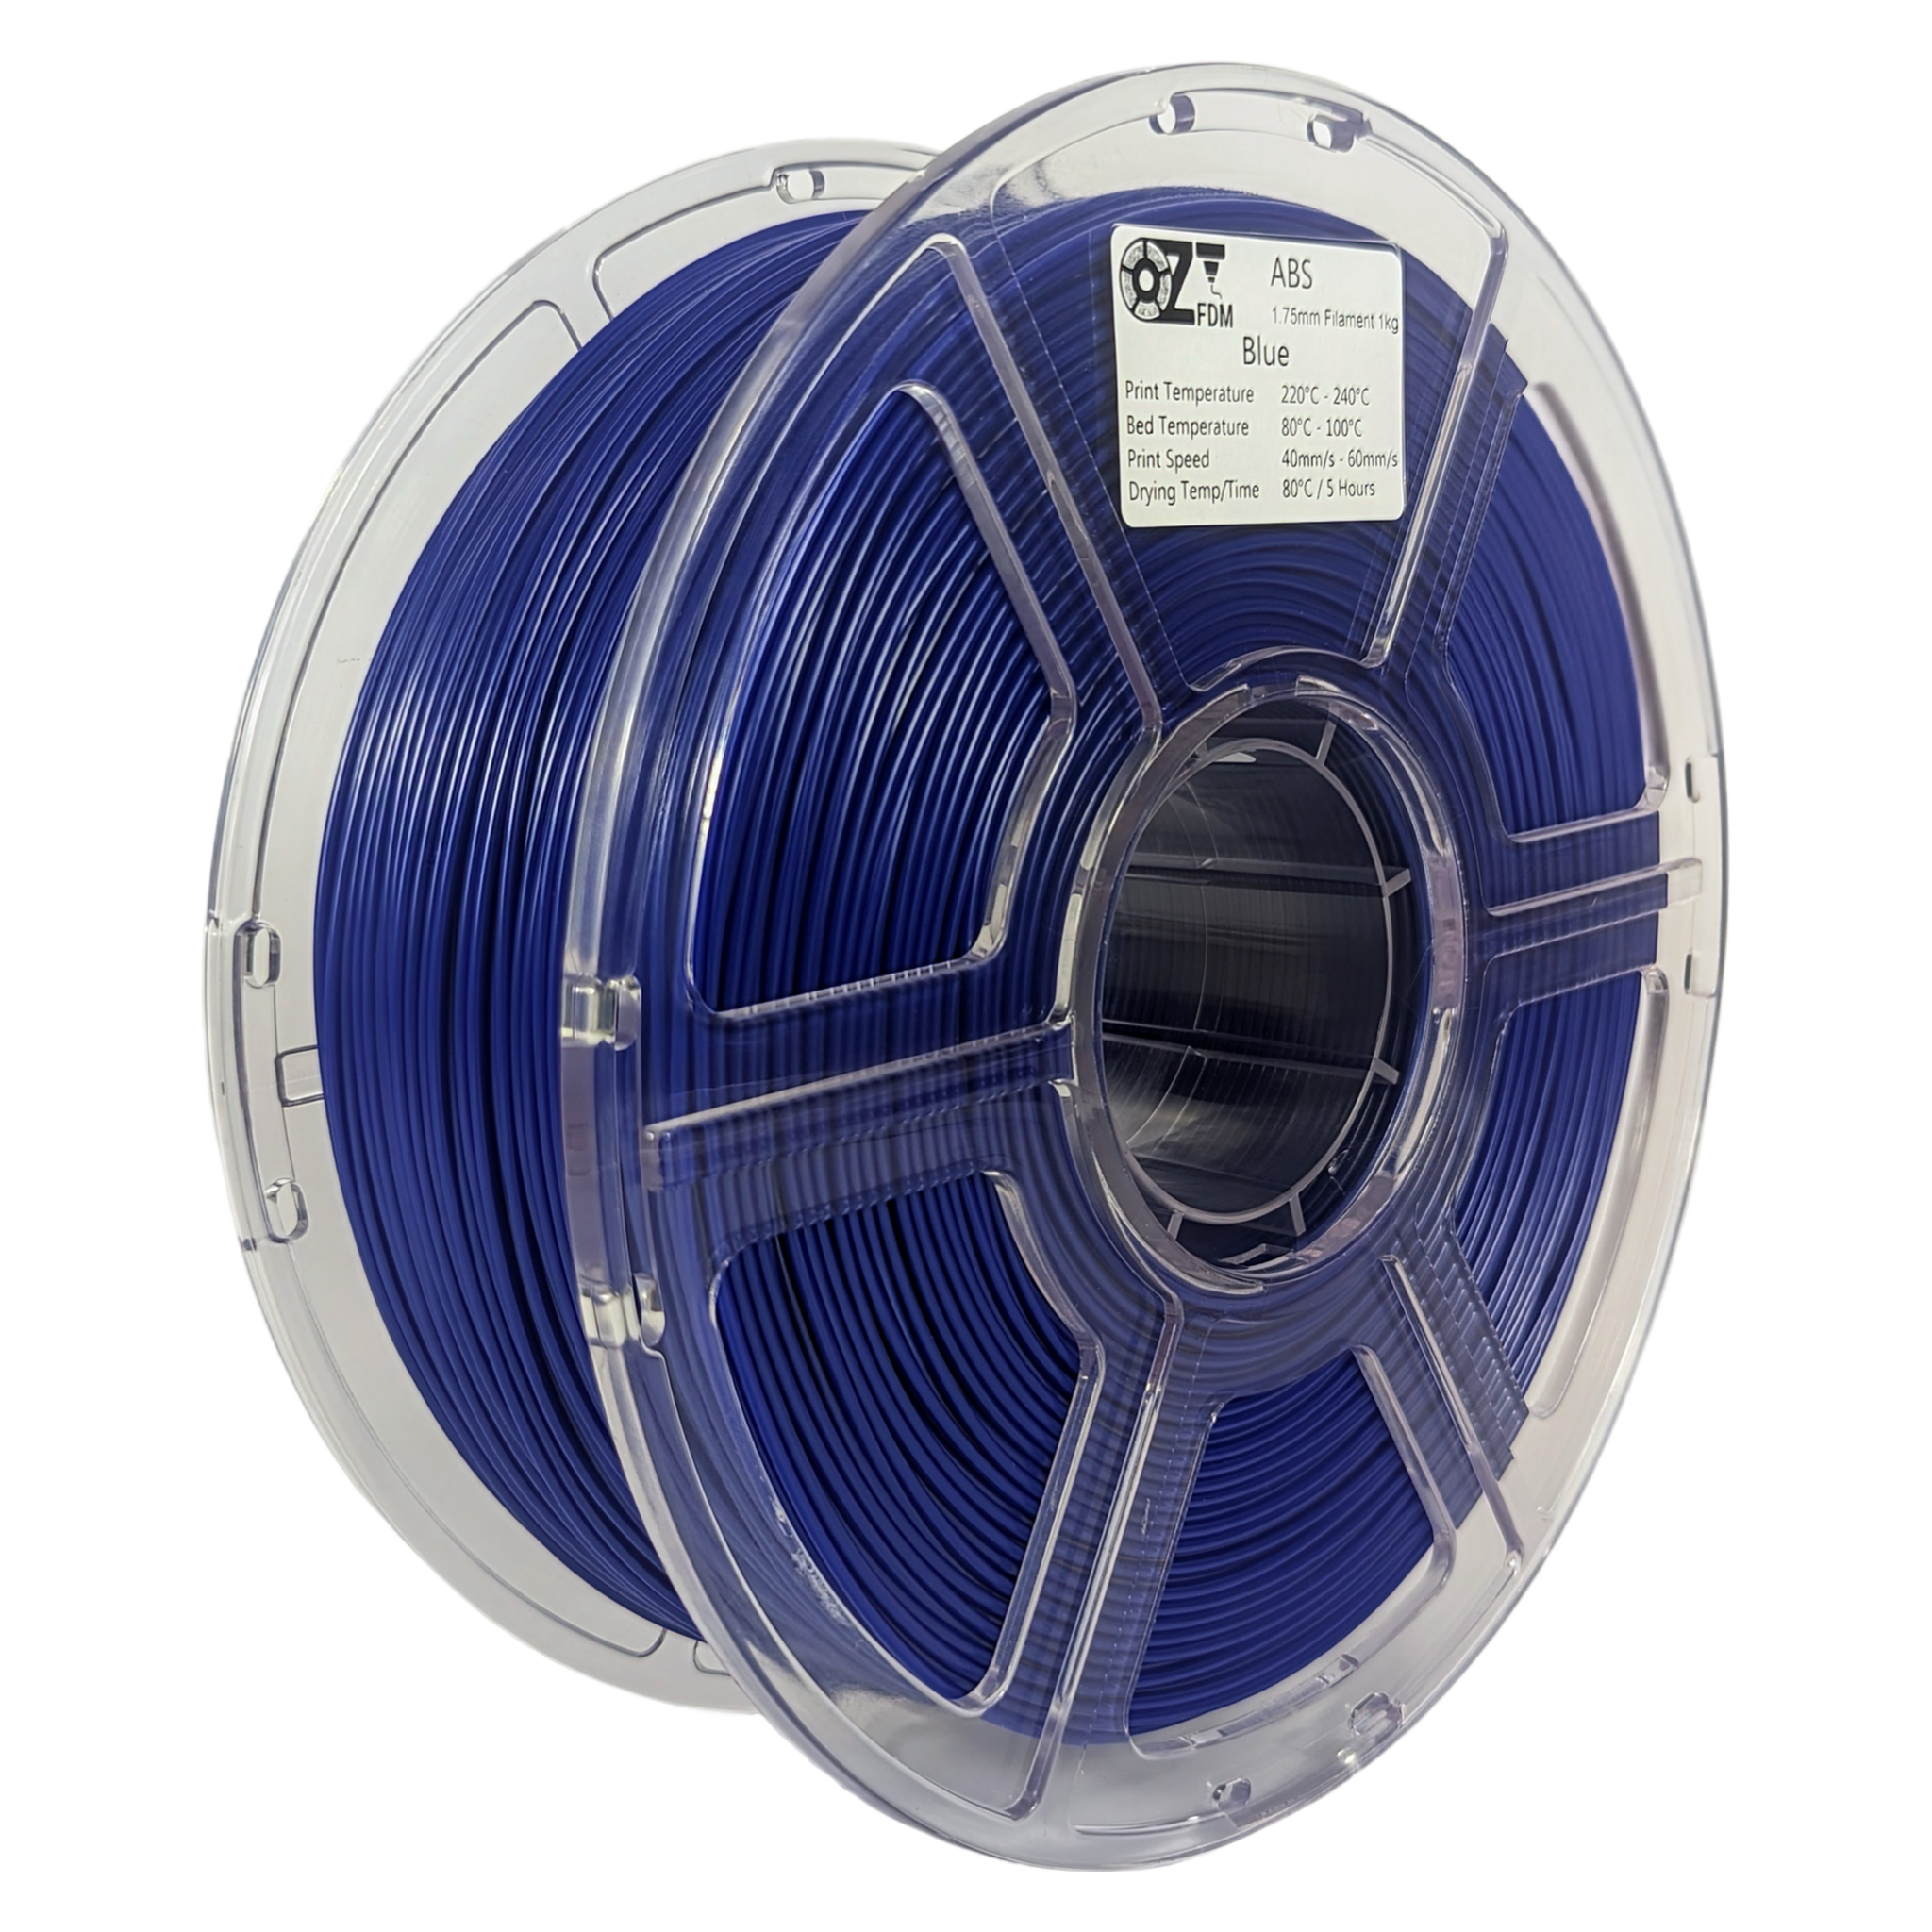 OzFDM ABS+ (ABSpro) 3D Printing Filament 1.75mm 1KG